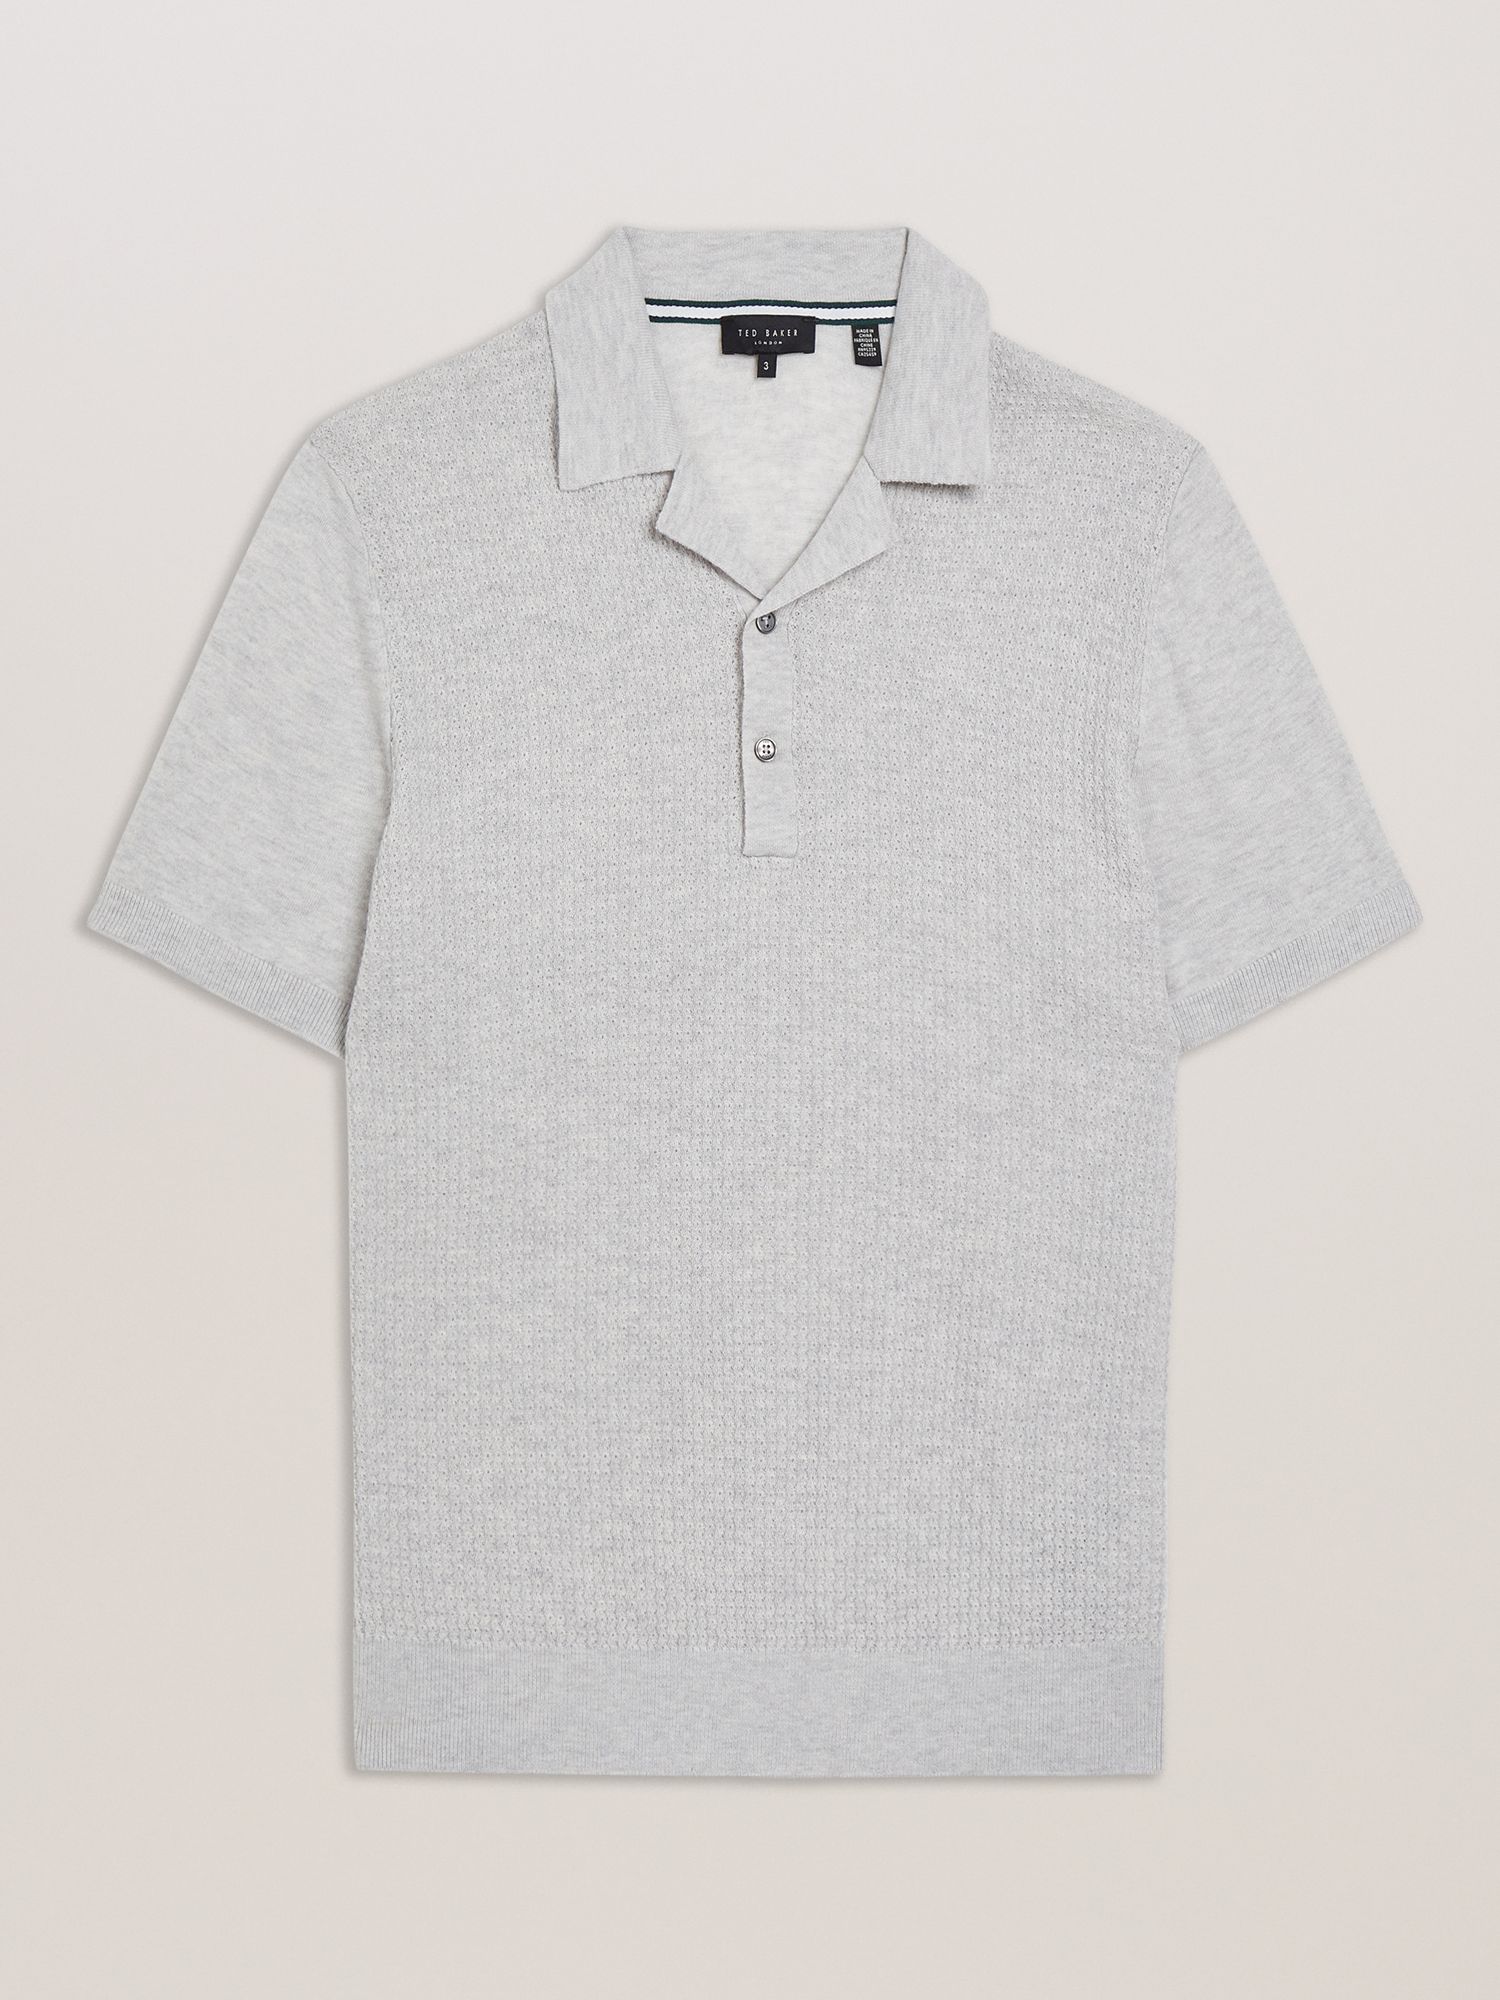 Ted Baker Adio Textured Front Polo Shirt, Light Grey, XS